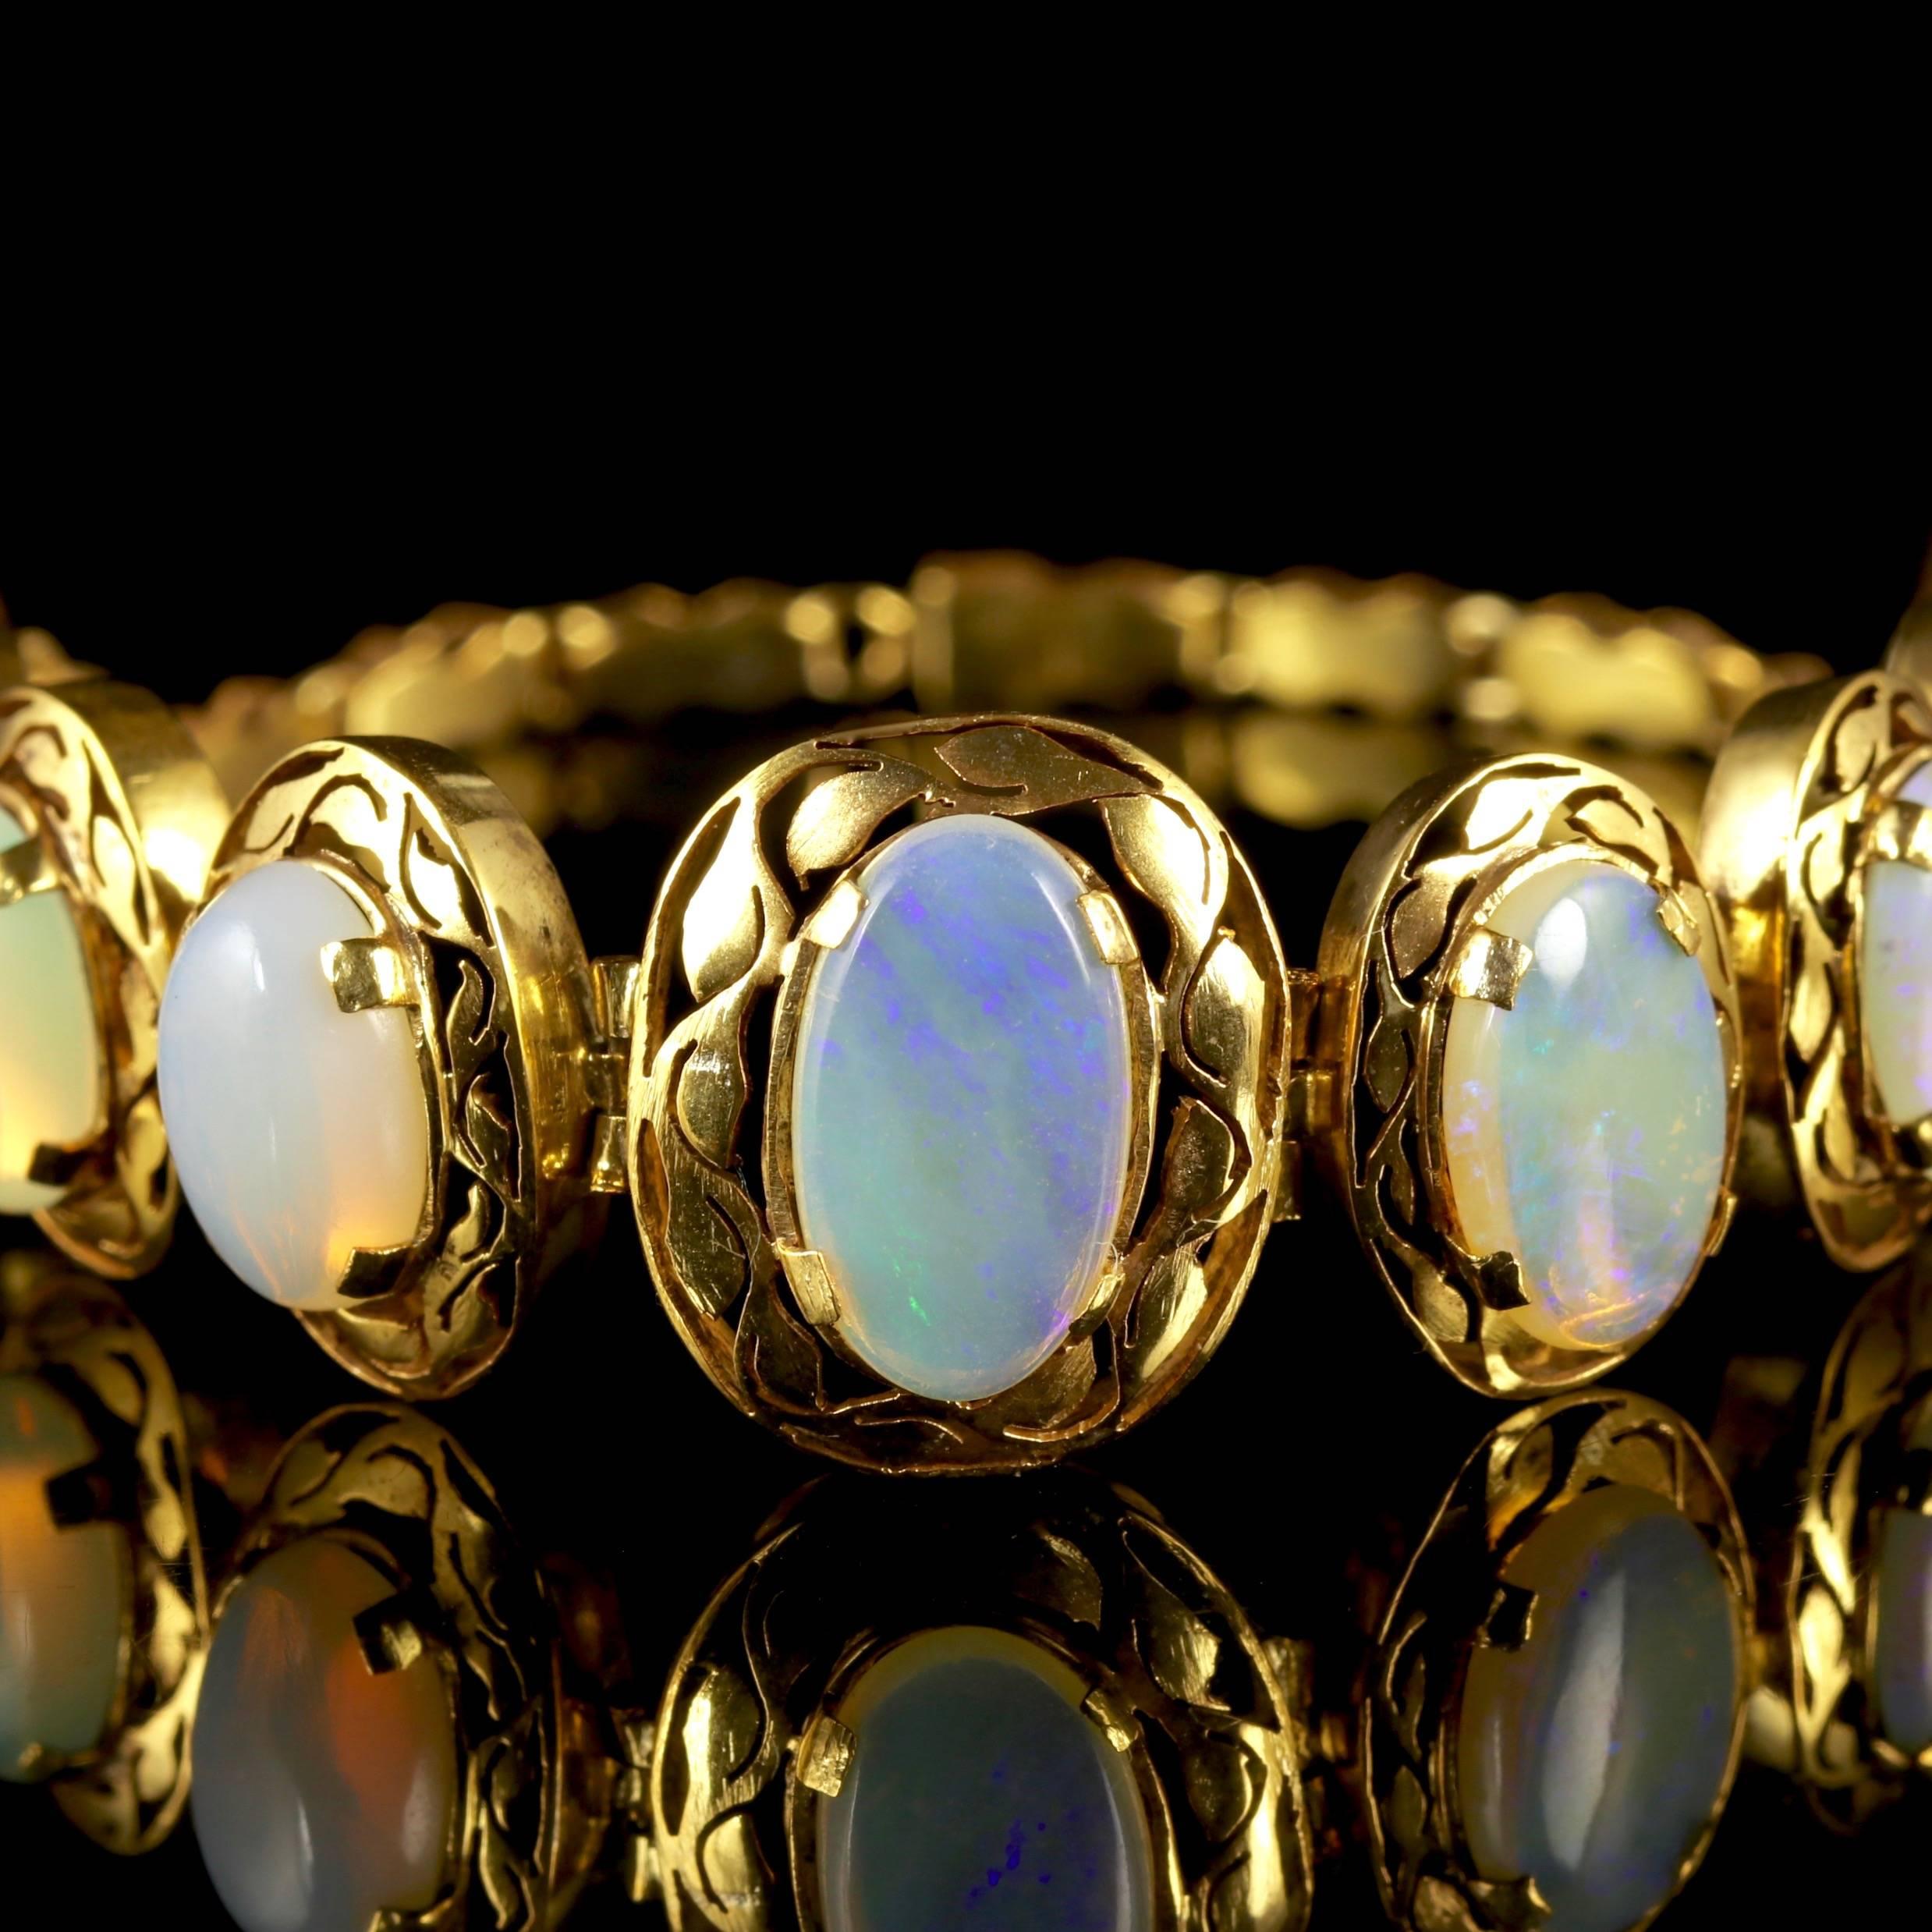 This beautiful Victorian Opal bracelet is, Circa 1900.

The Opal increase in size towards the centre of the bracelet.

The largest Opal is around 6ct with the smallest Opal at 2.5ct.

The total amount of Opal is approx. 25ct.

The lovely natural